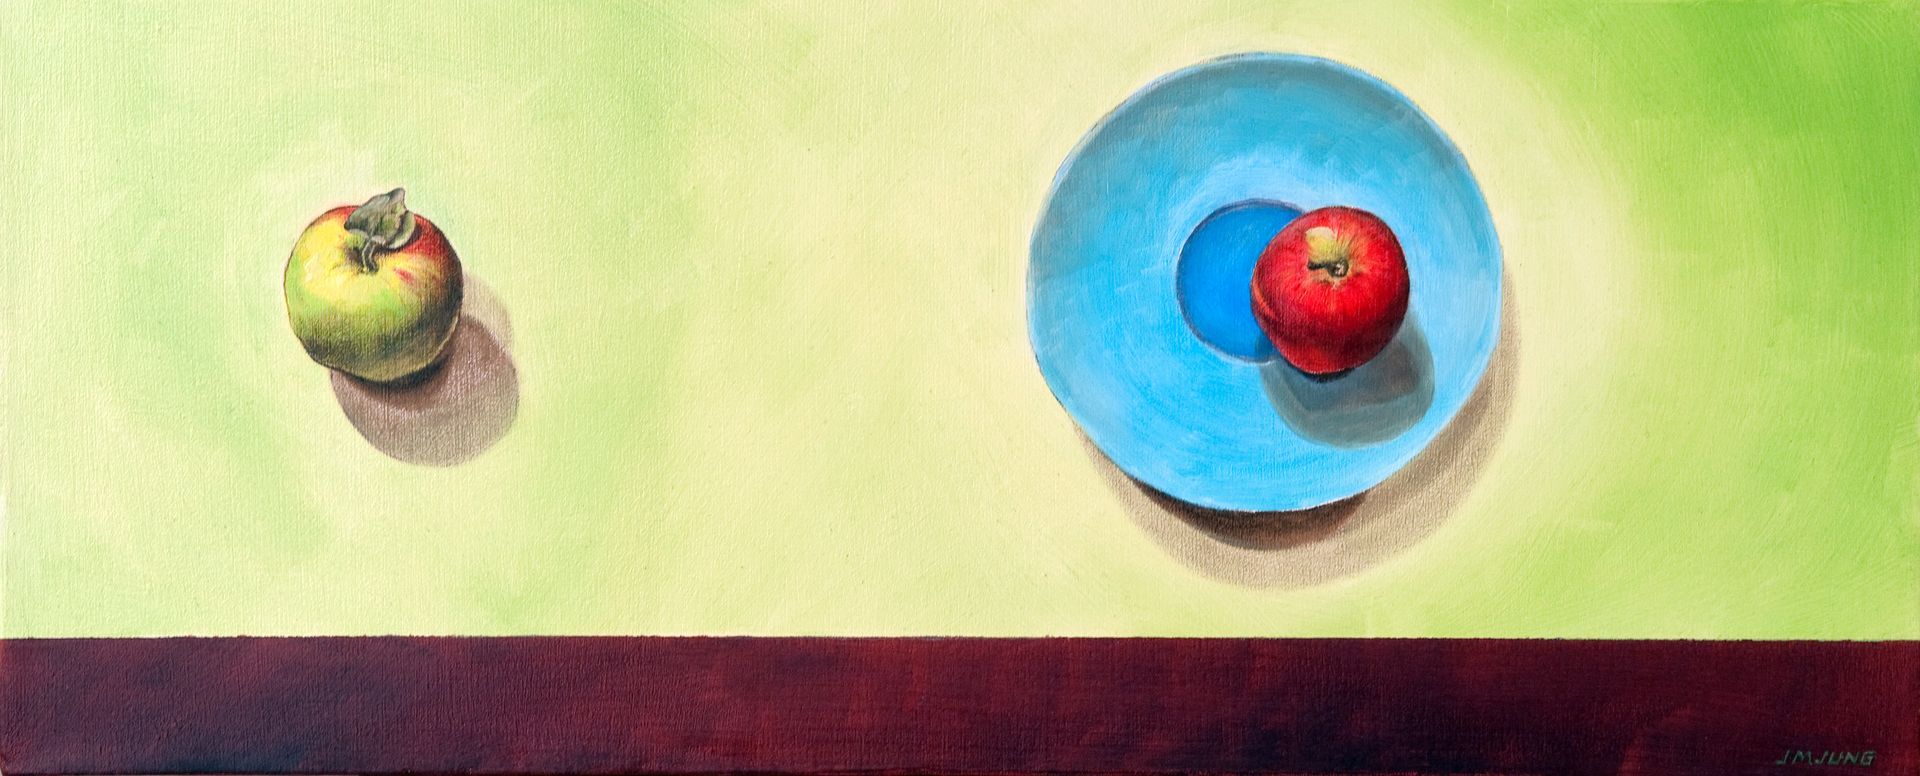 Looking down on one green and red apple and a red apple that is sitting on a blue plate. The background is green and the bottom edge is brown.